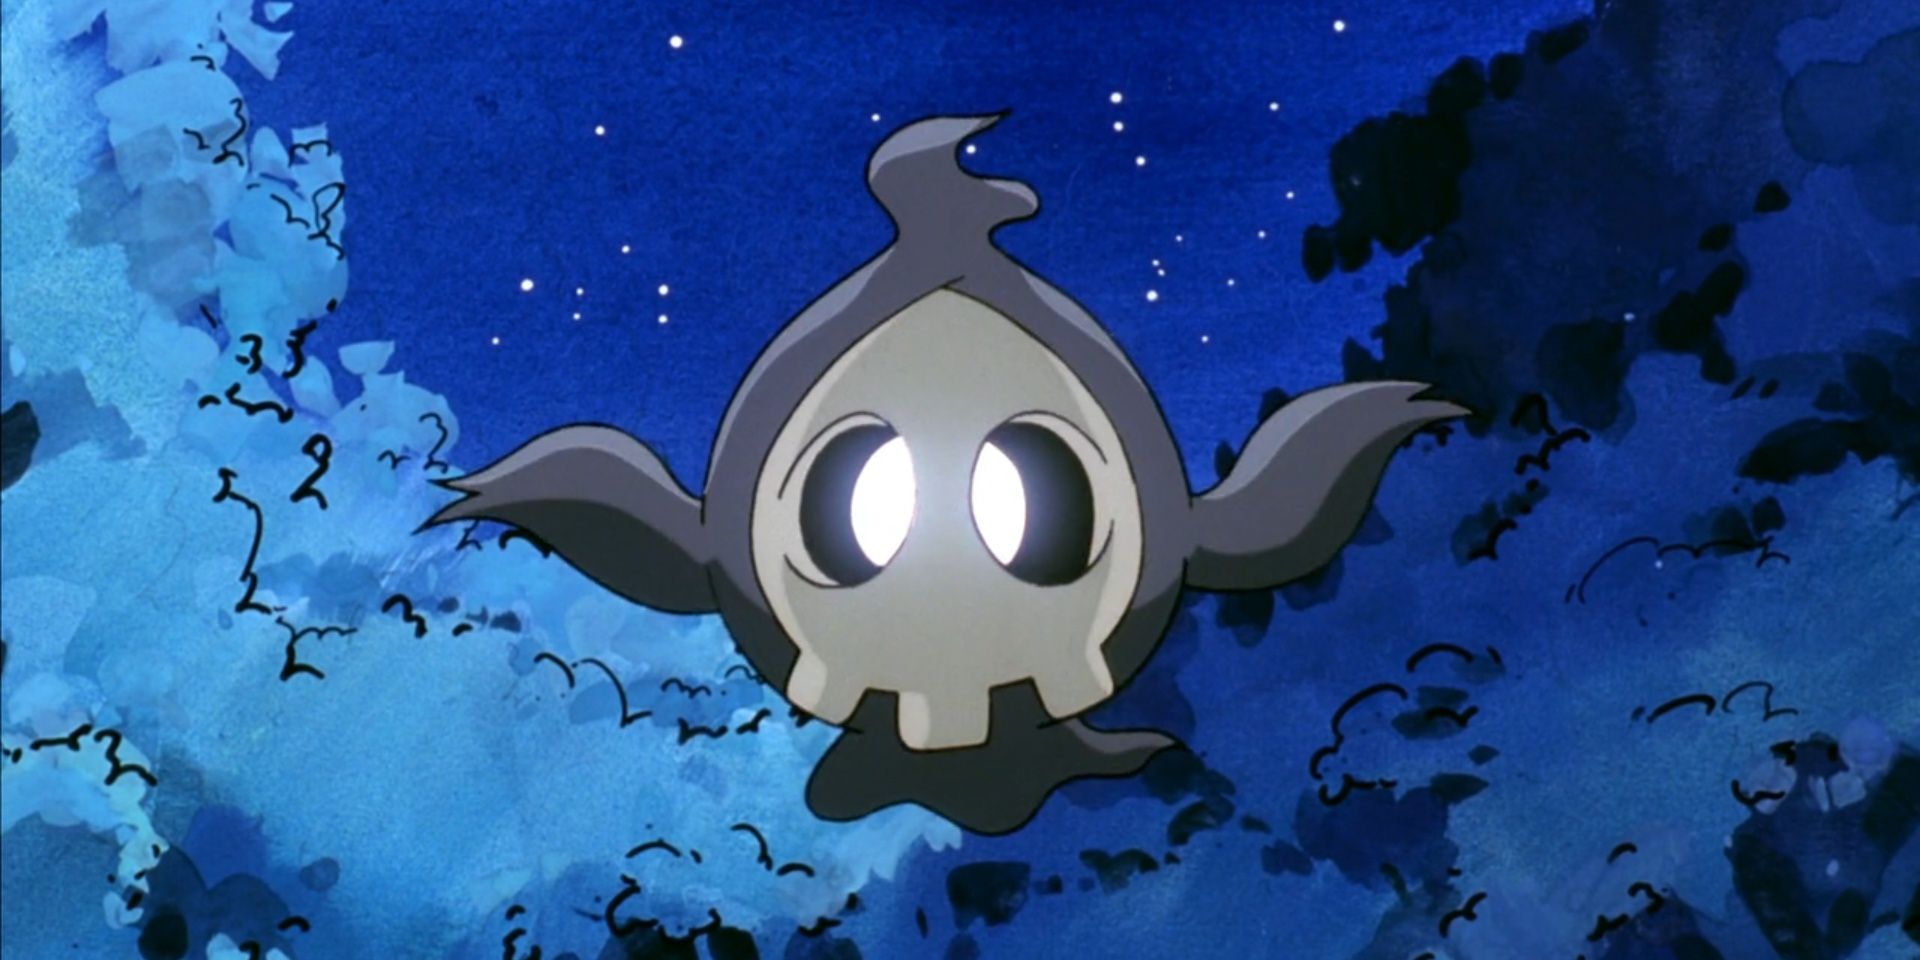 Duskull being scary in the Pokemon anime